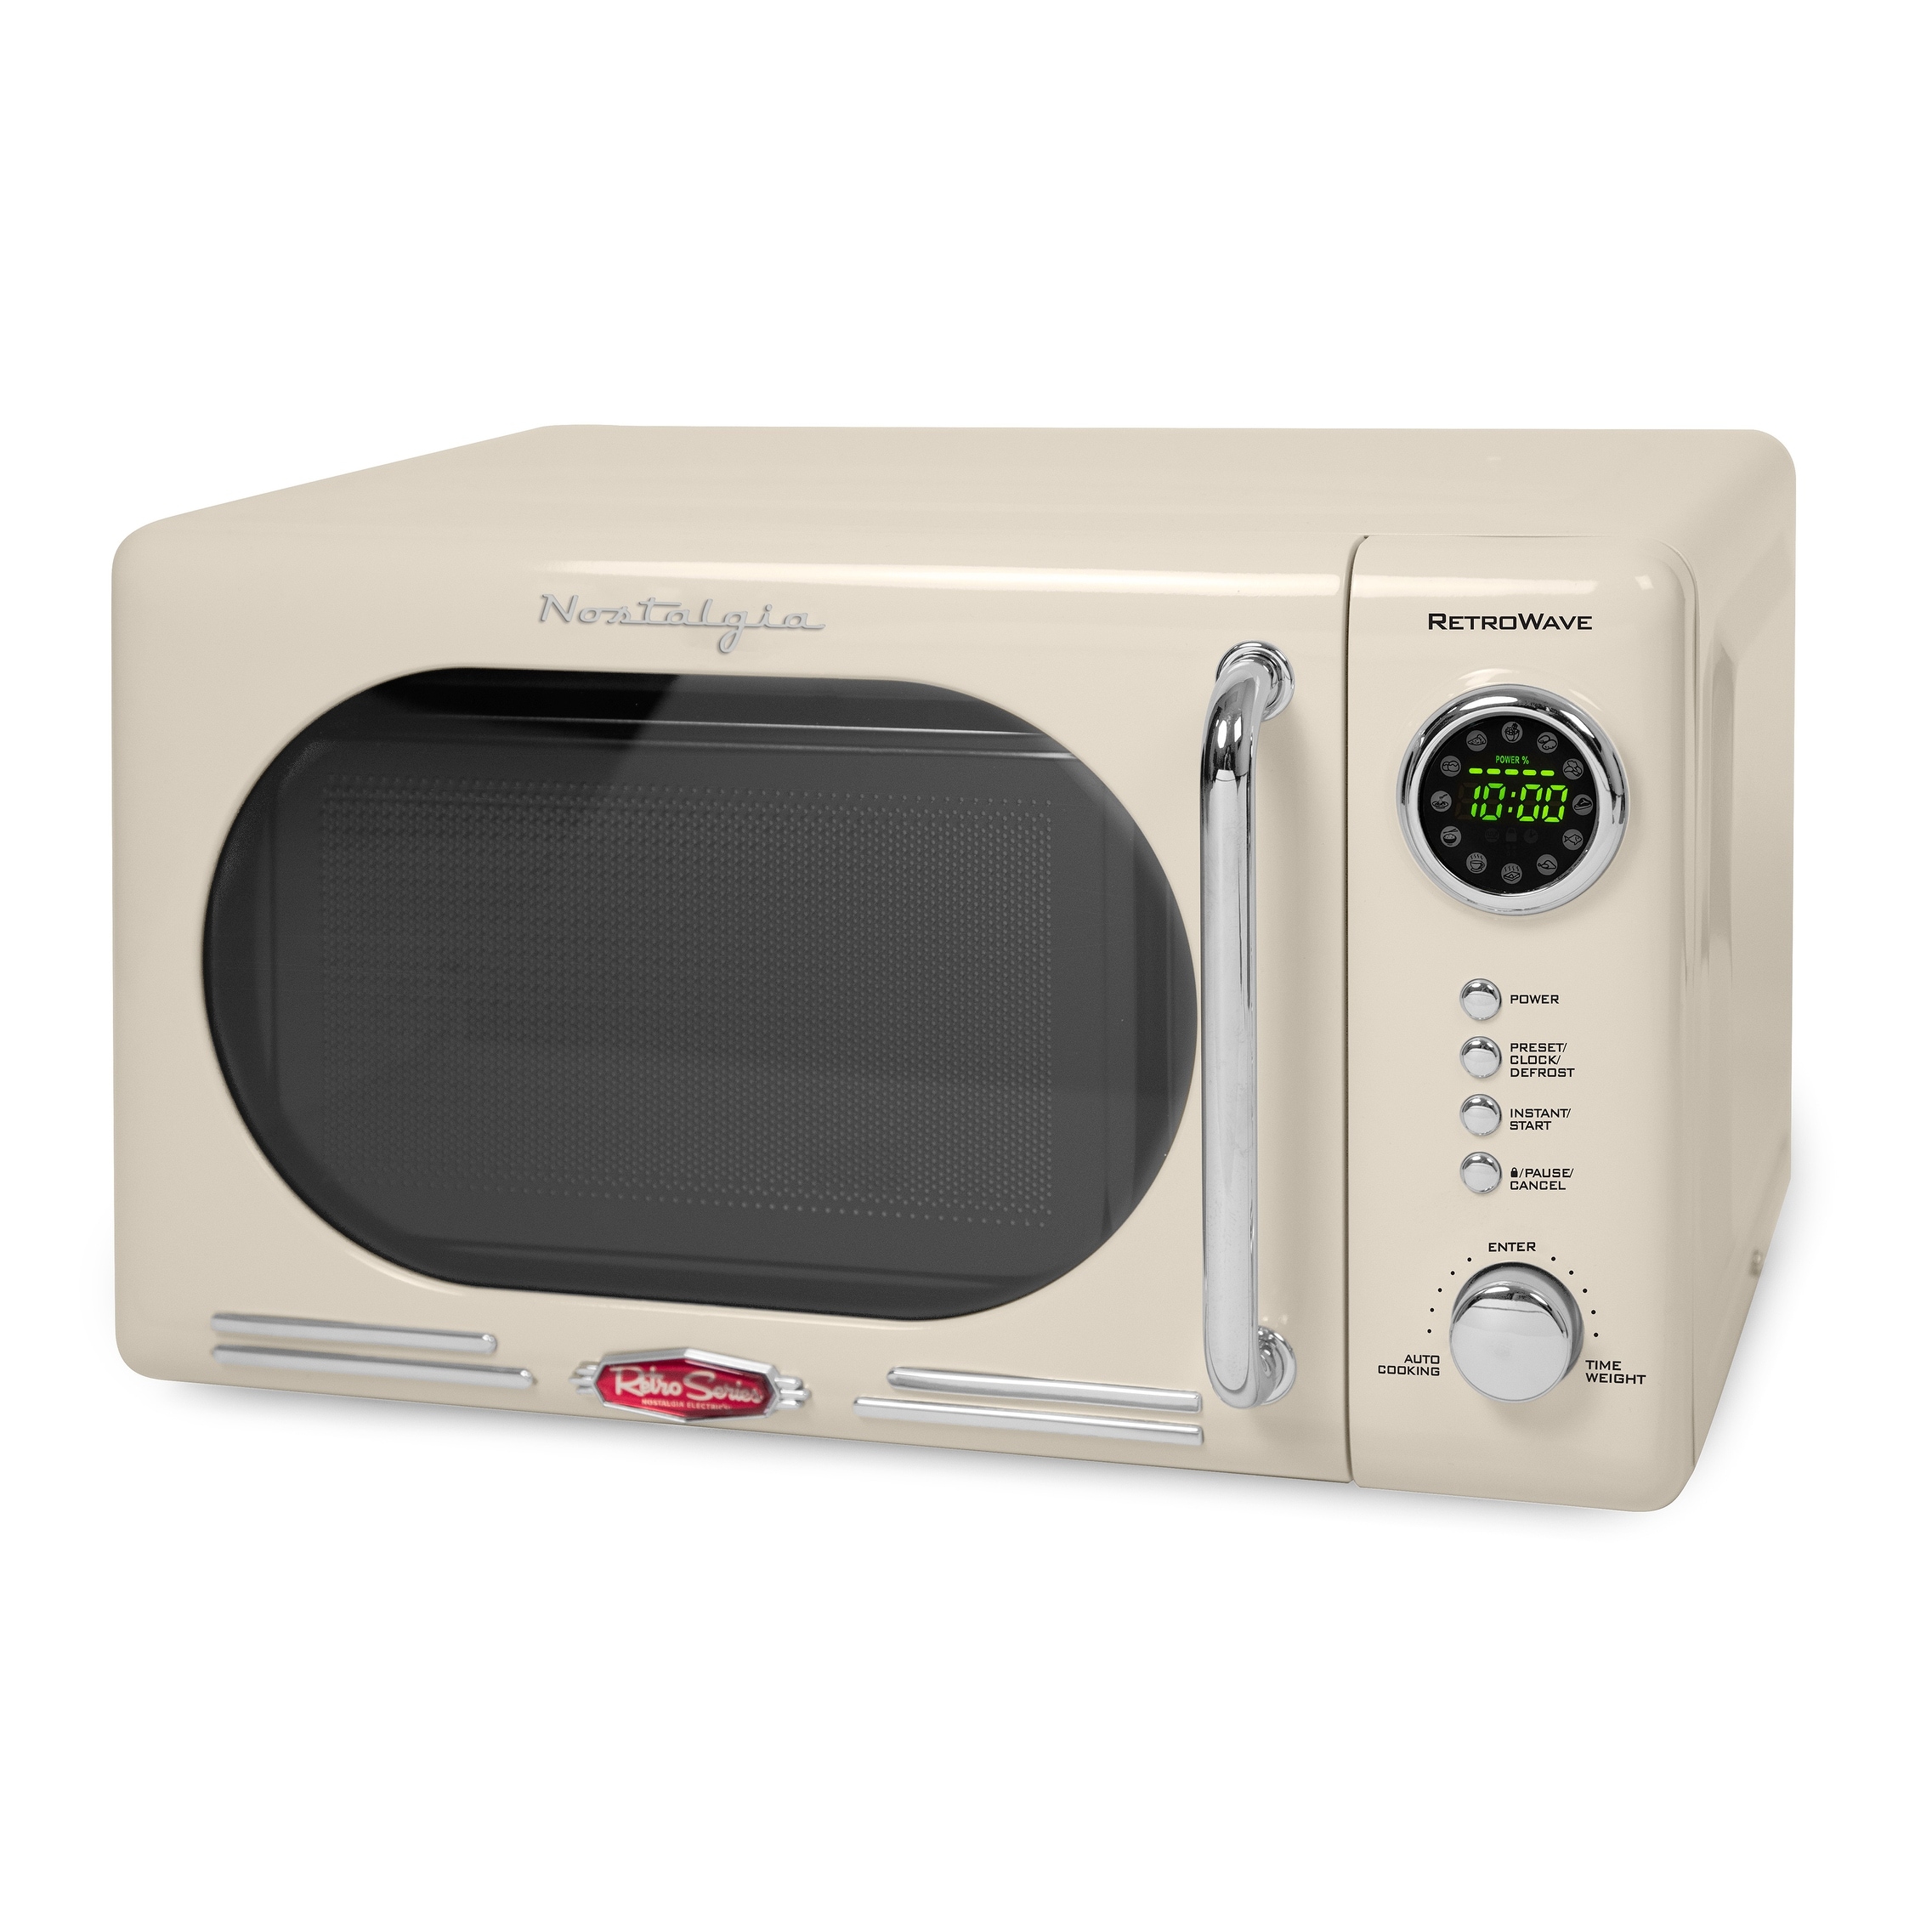 Small Black Microwave Cheap Microwave Oven 700W Power For Kitchen US